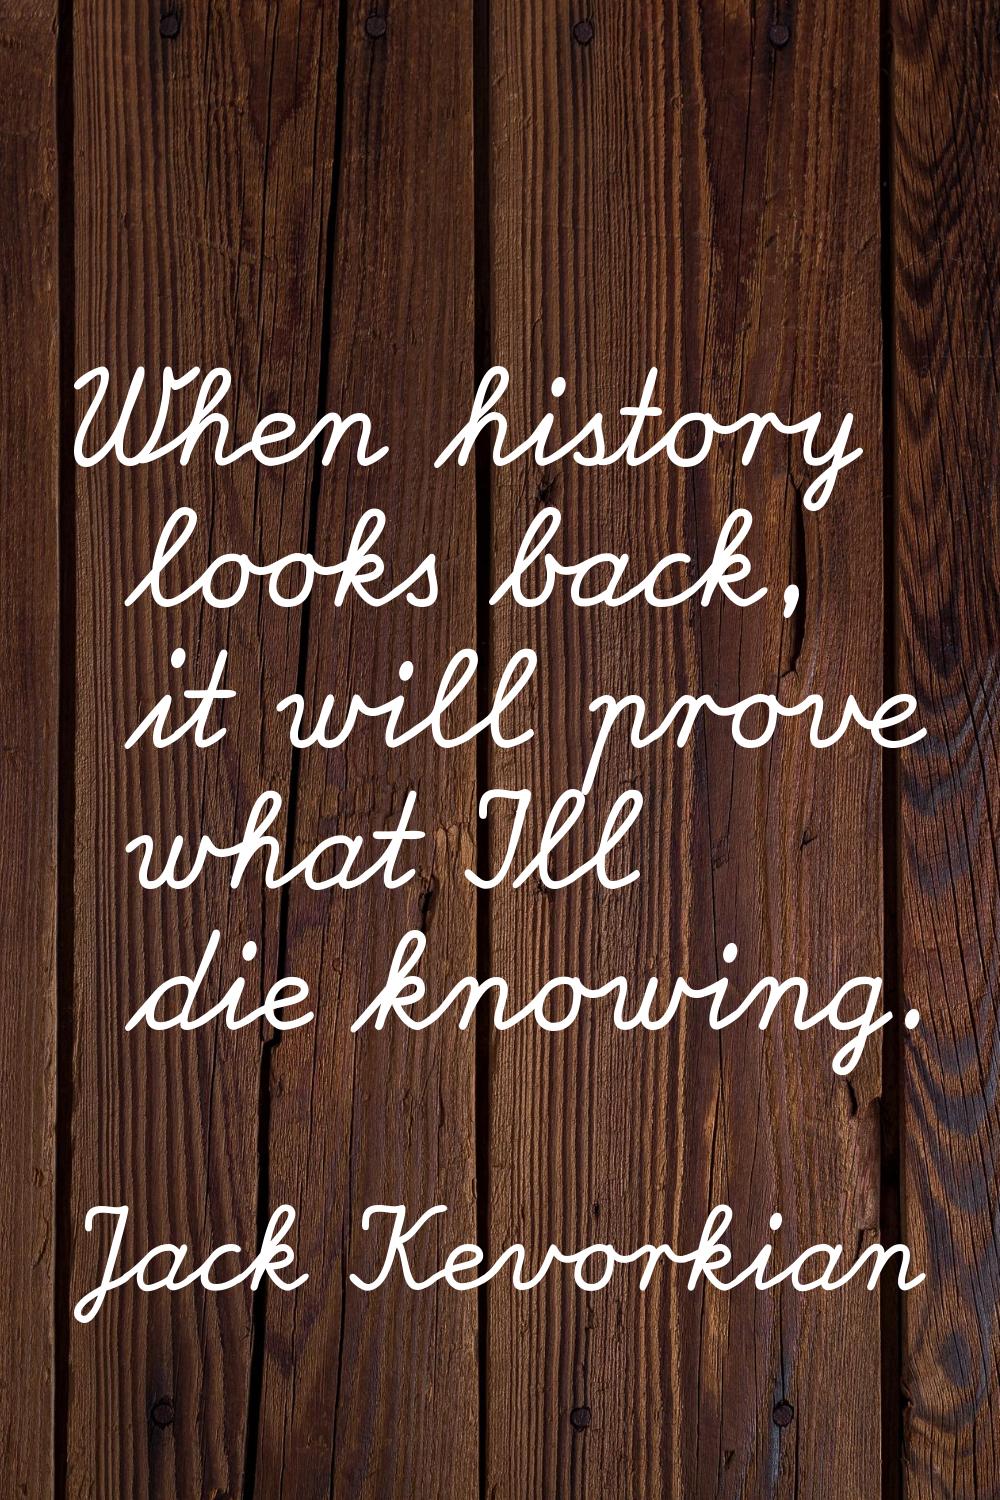 When history looks back, it will prove what I'll die knowing.